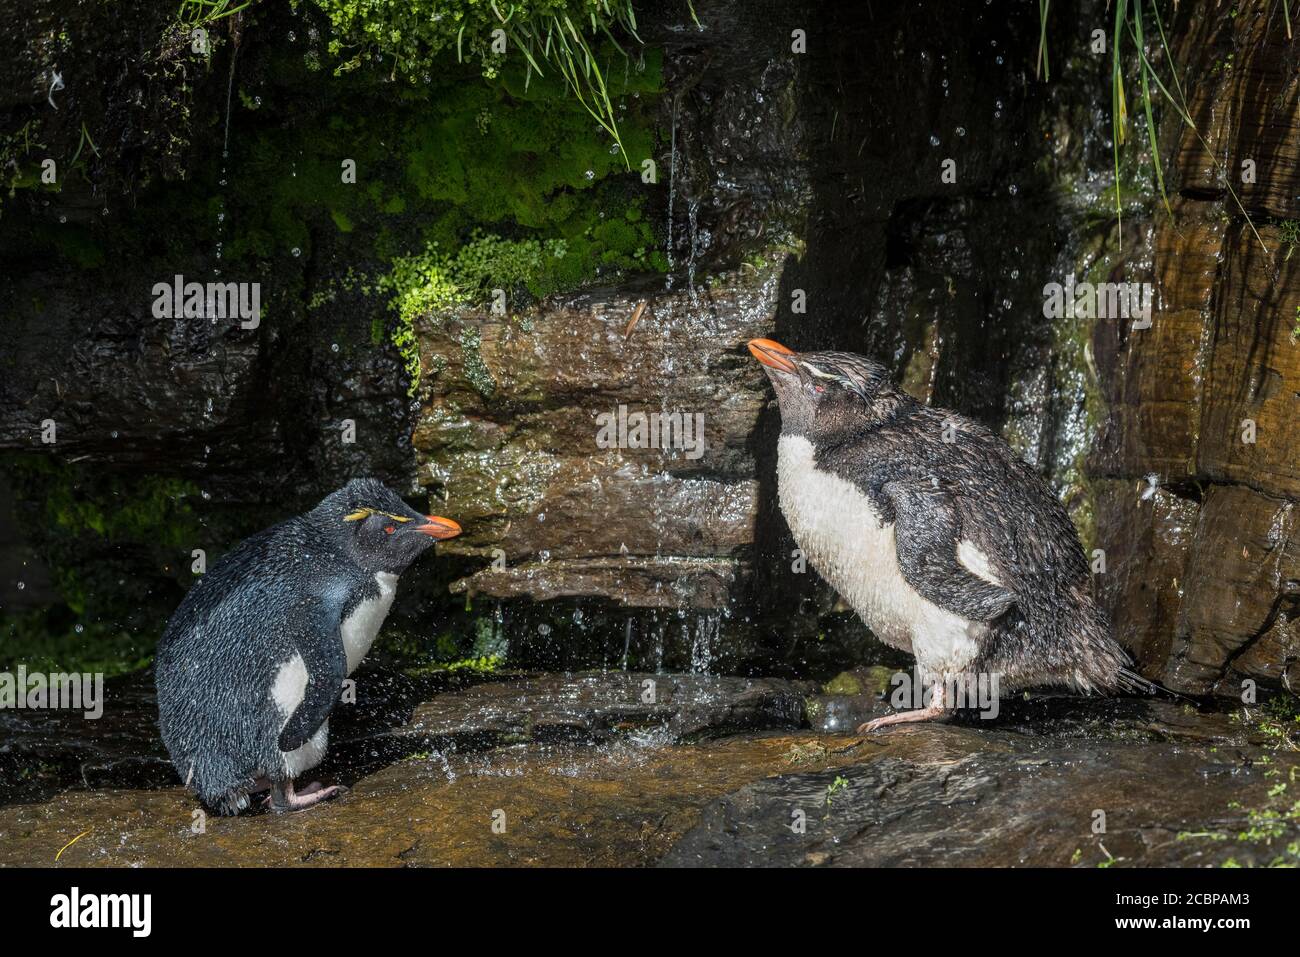 Southern Rockhopper Penguins (Eudyptes chrysocome) clean their plumage at a fresh water site, Saunders Island, Falkland Islands, Great Britain, South Stock Photo